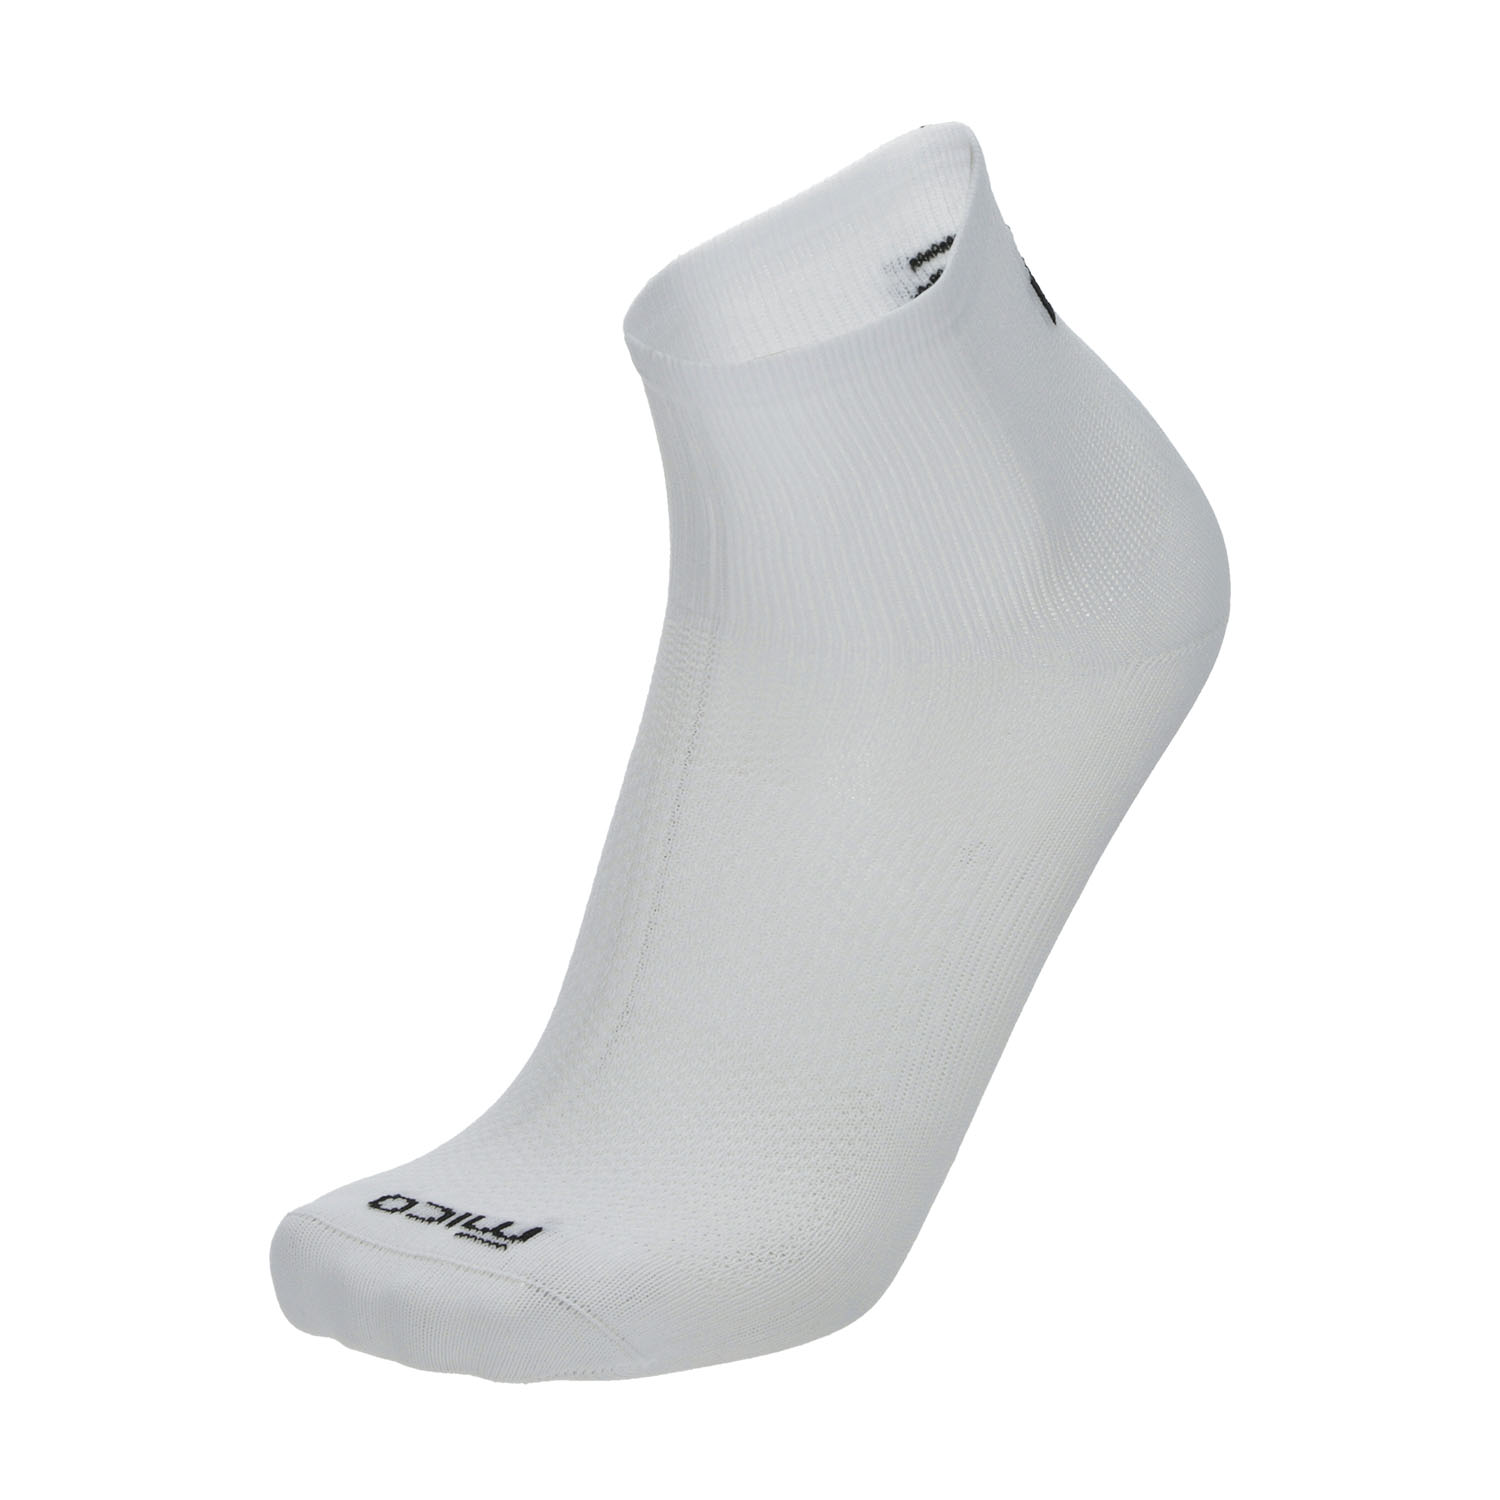 Mico Light Weight Pro x 3 Calcetines - Bianco